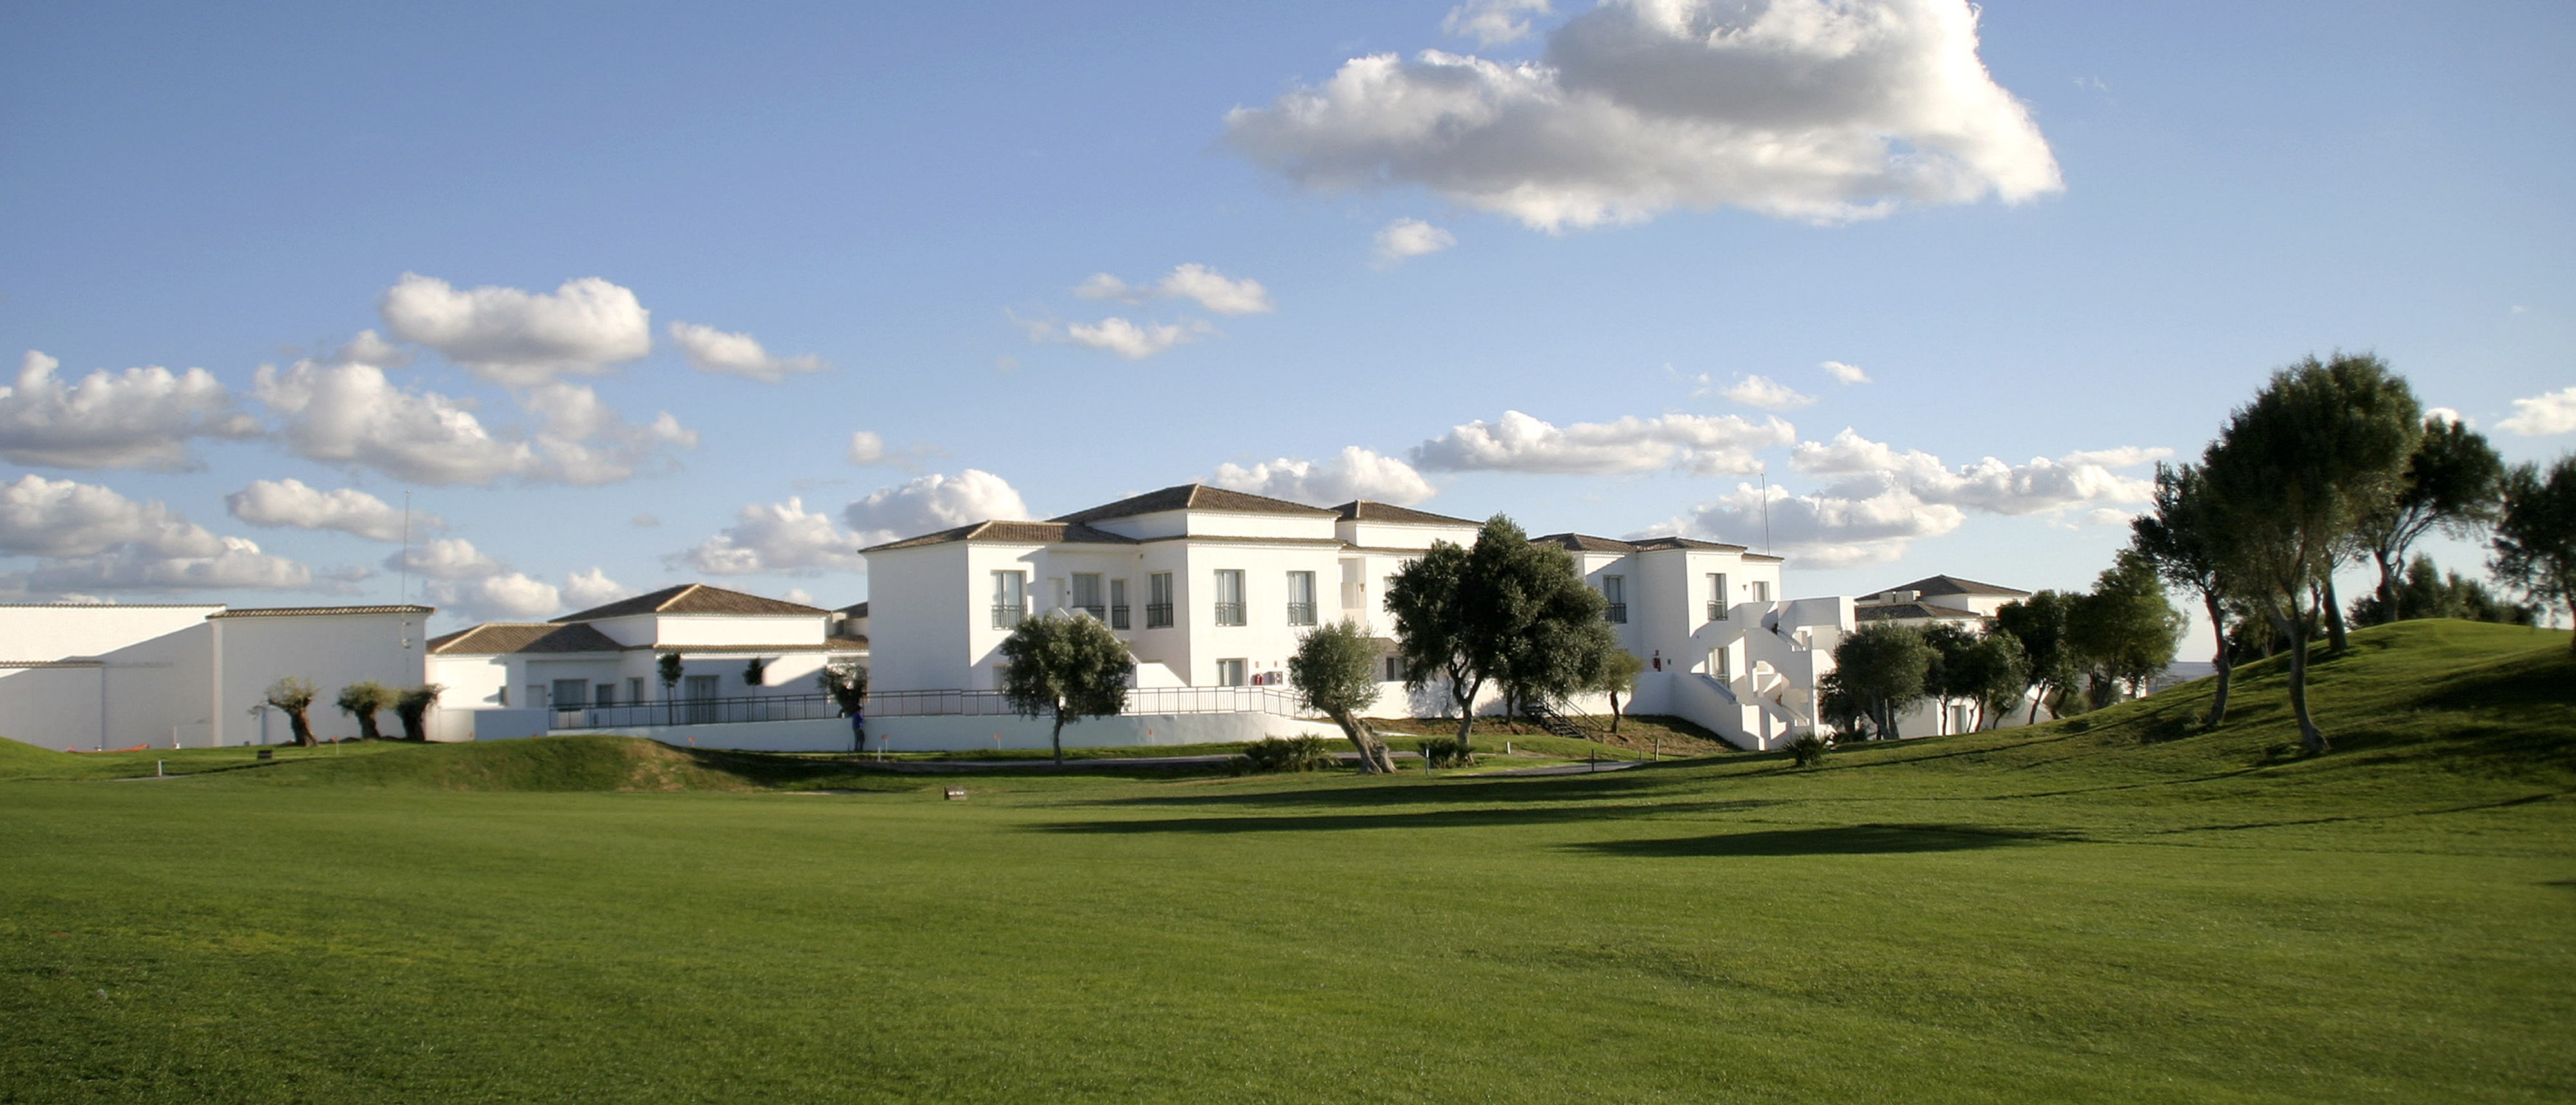 EXCLUSIVE! Check out this cracking golf package deal with Golf Escapes